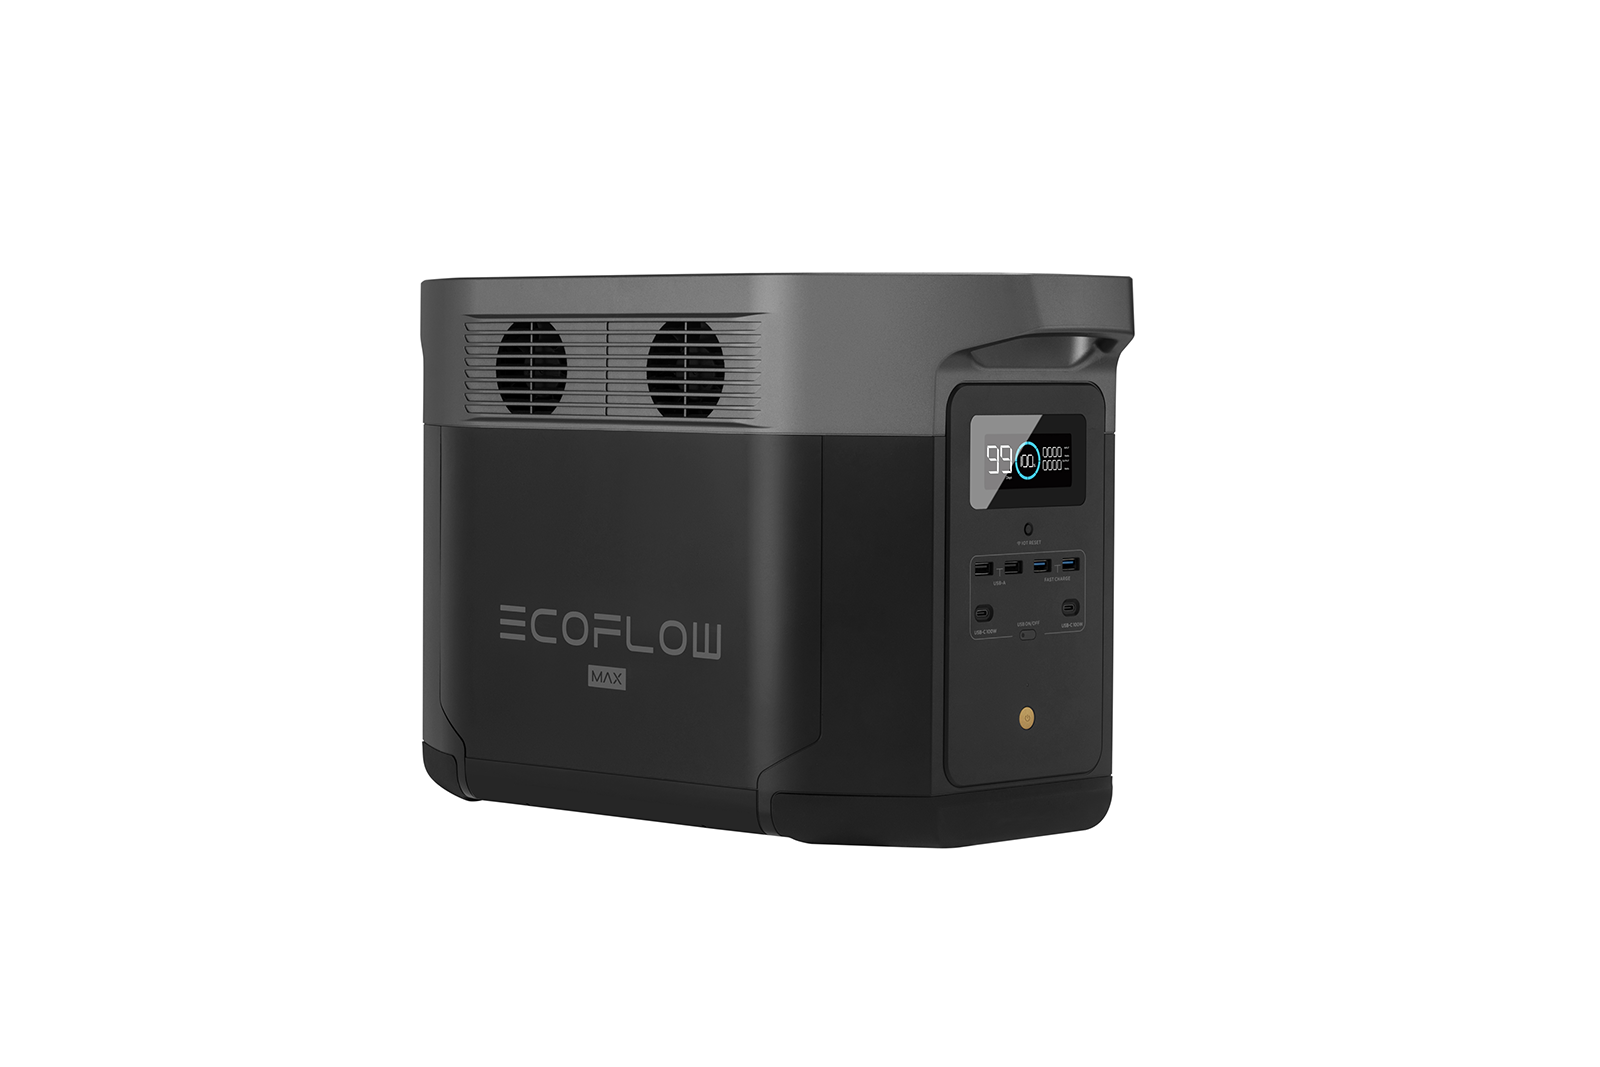 EcoFlow's Black Friday deals offer up some superb savings photo 2